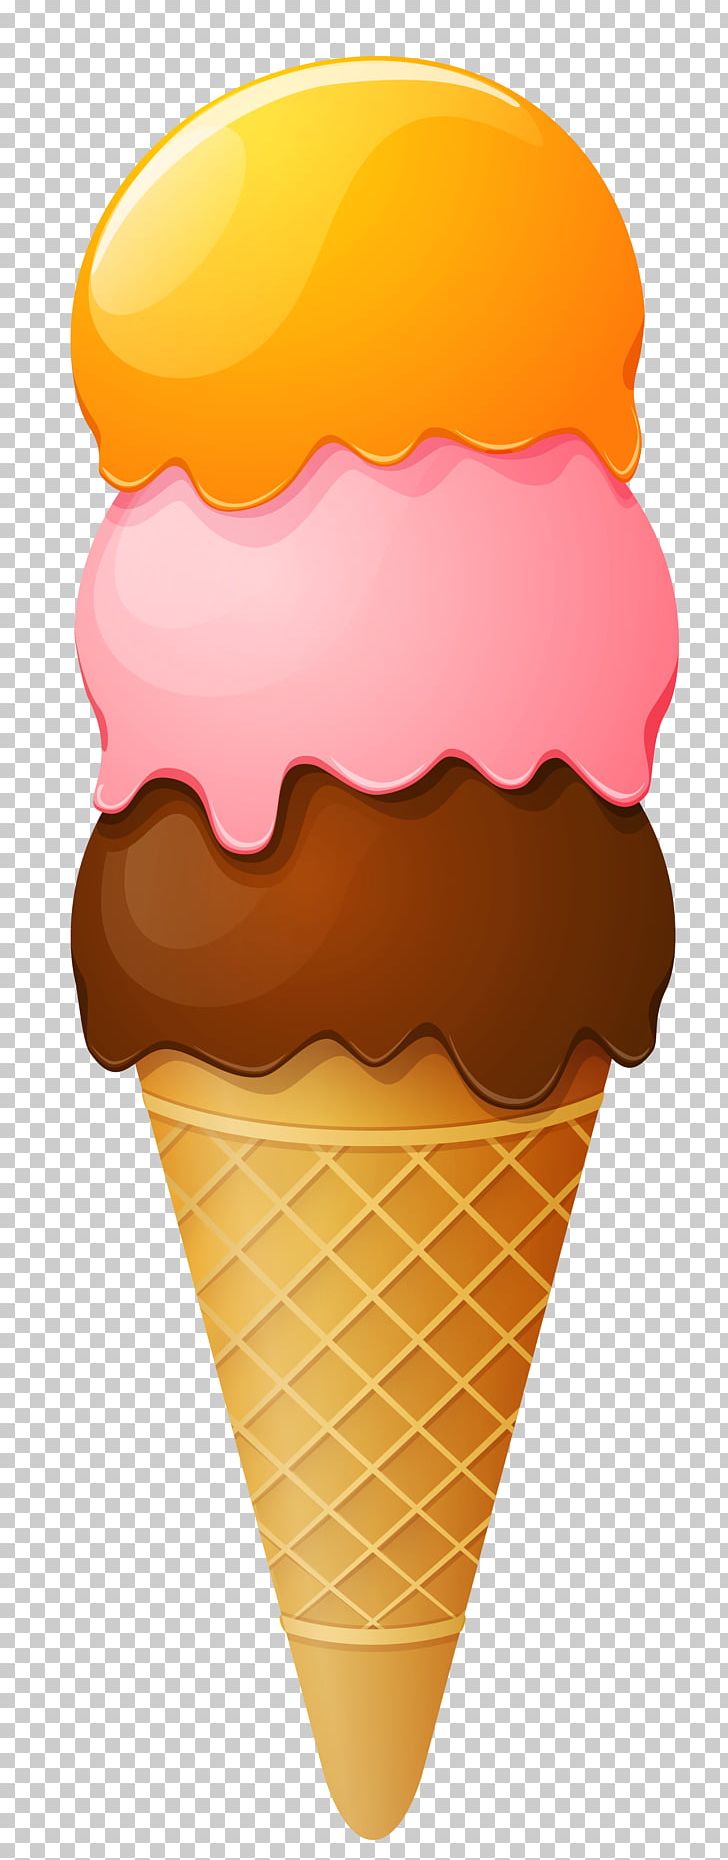 Ice Cream Cones Sundae PNG, Clipart, Chocolate Ice Cream, Cone, Cream, Dairy Product, Dairy Products Free PNG Download